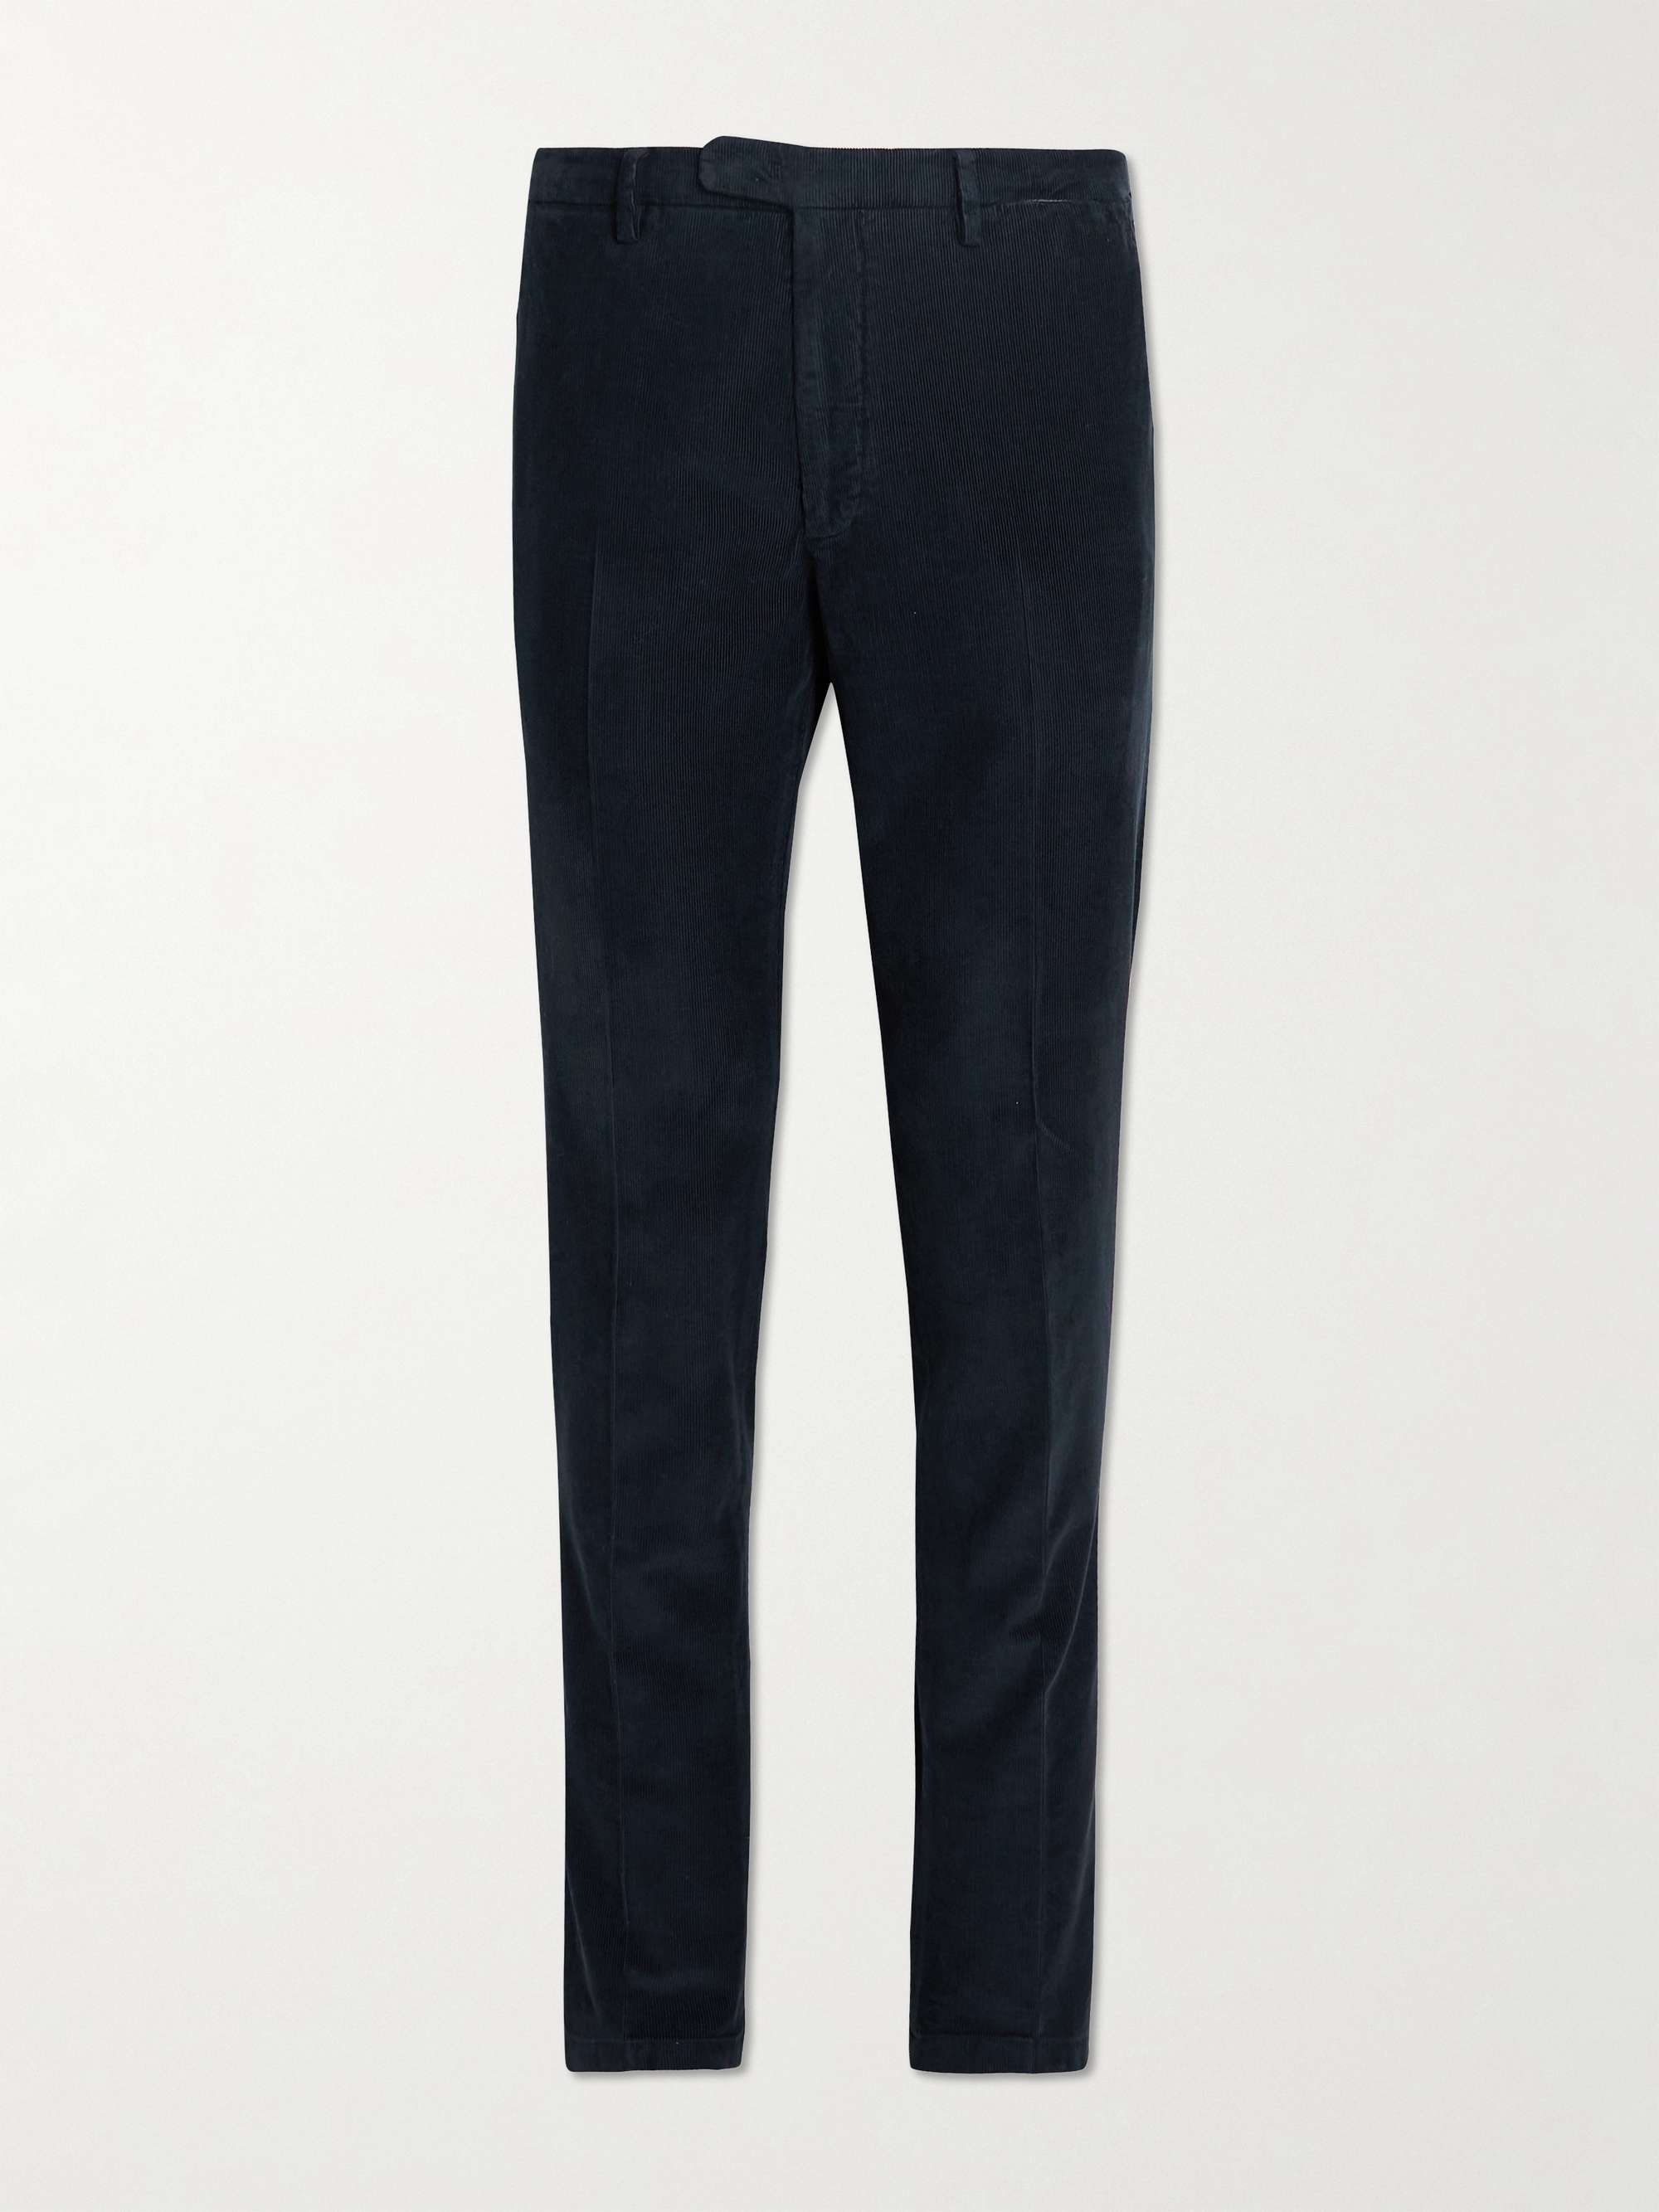 BOGLIOLI Slim-Fit Tapered Garment-Dyed Cotton-Blend Corduroy Trousers